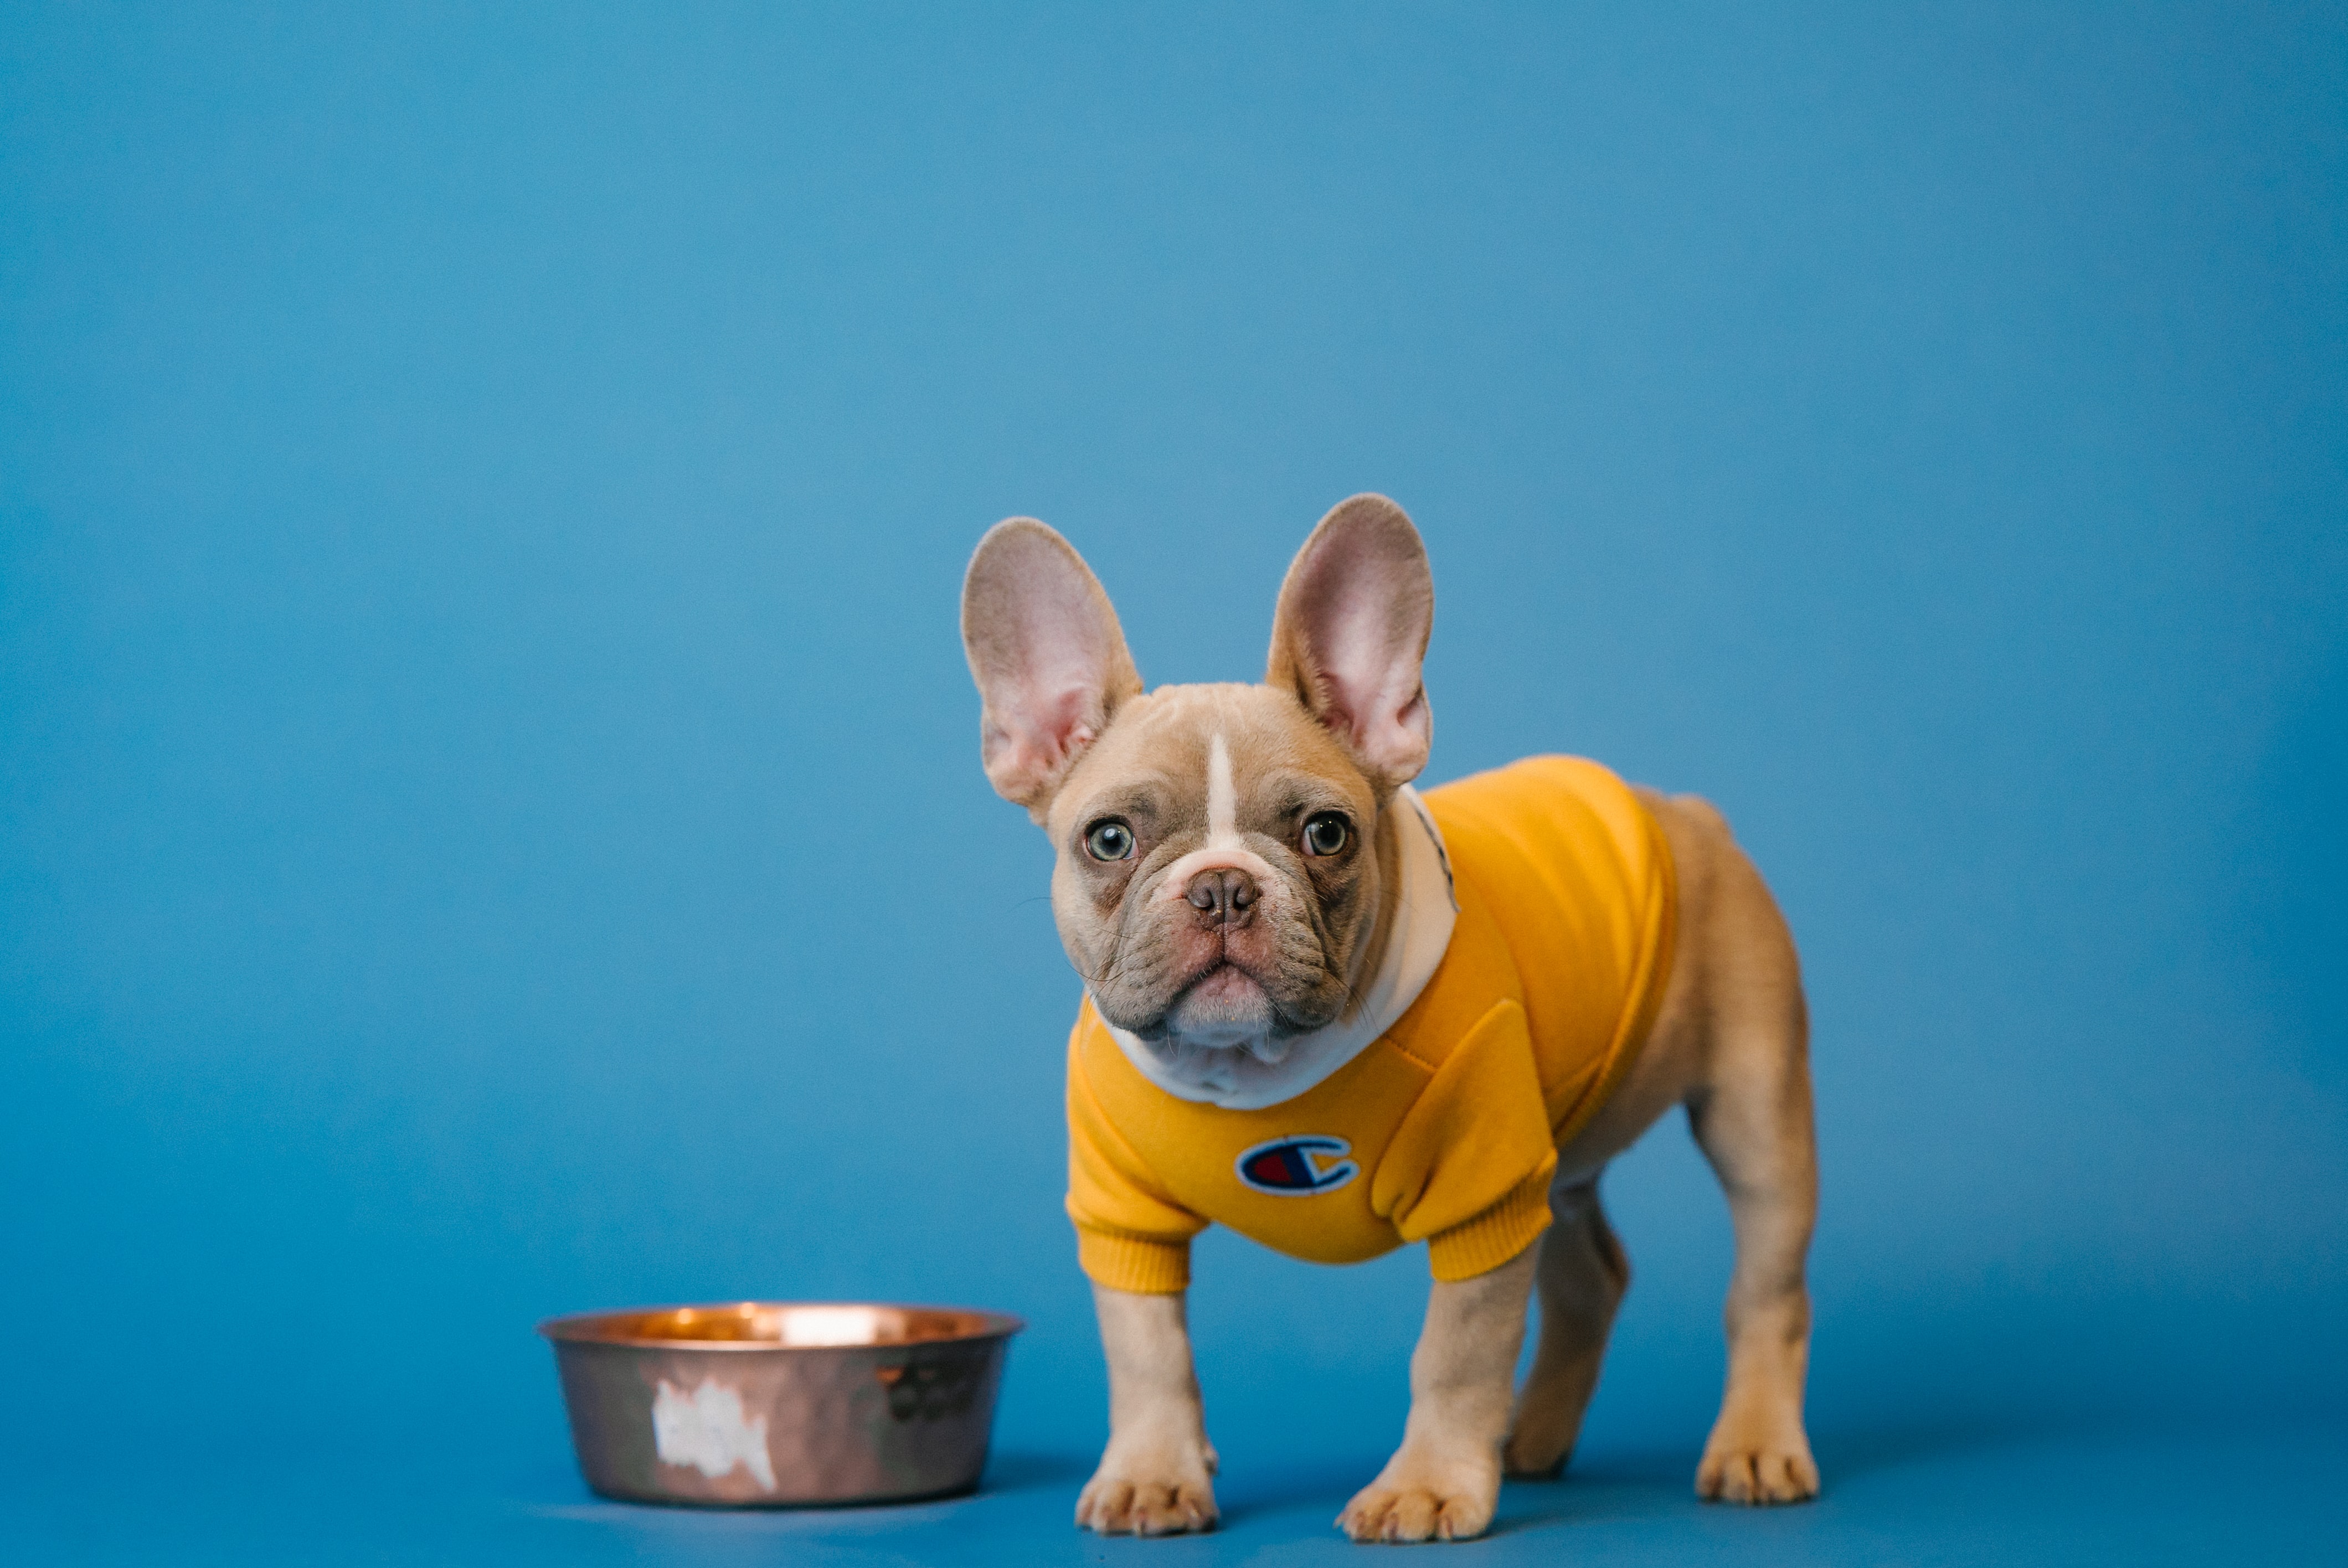 French bulldog standing next to a bowl of dog food